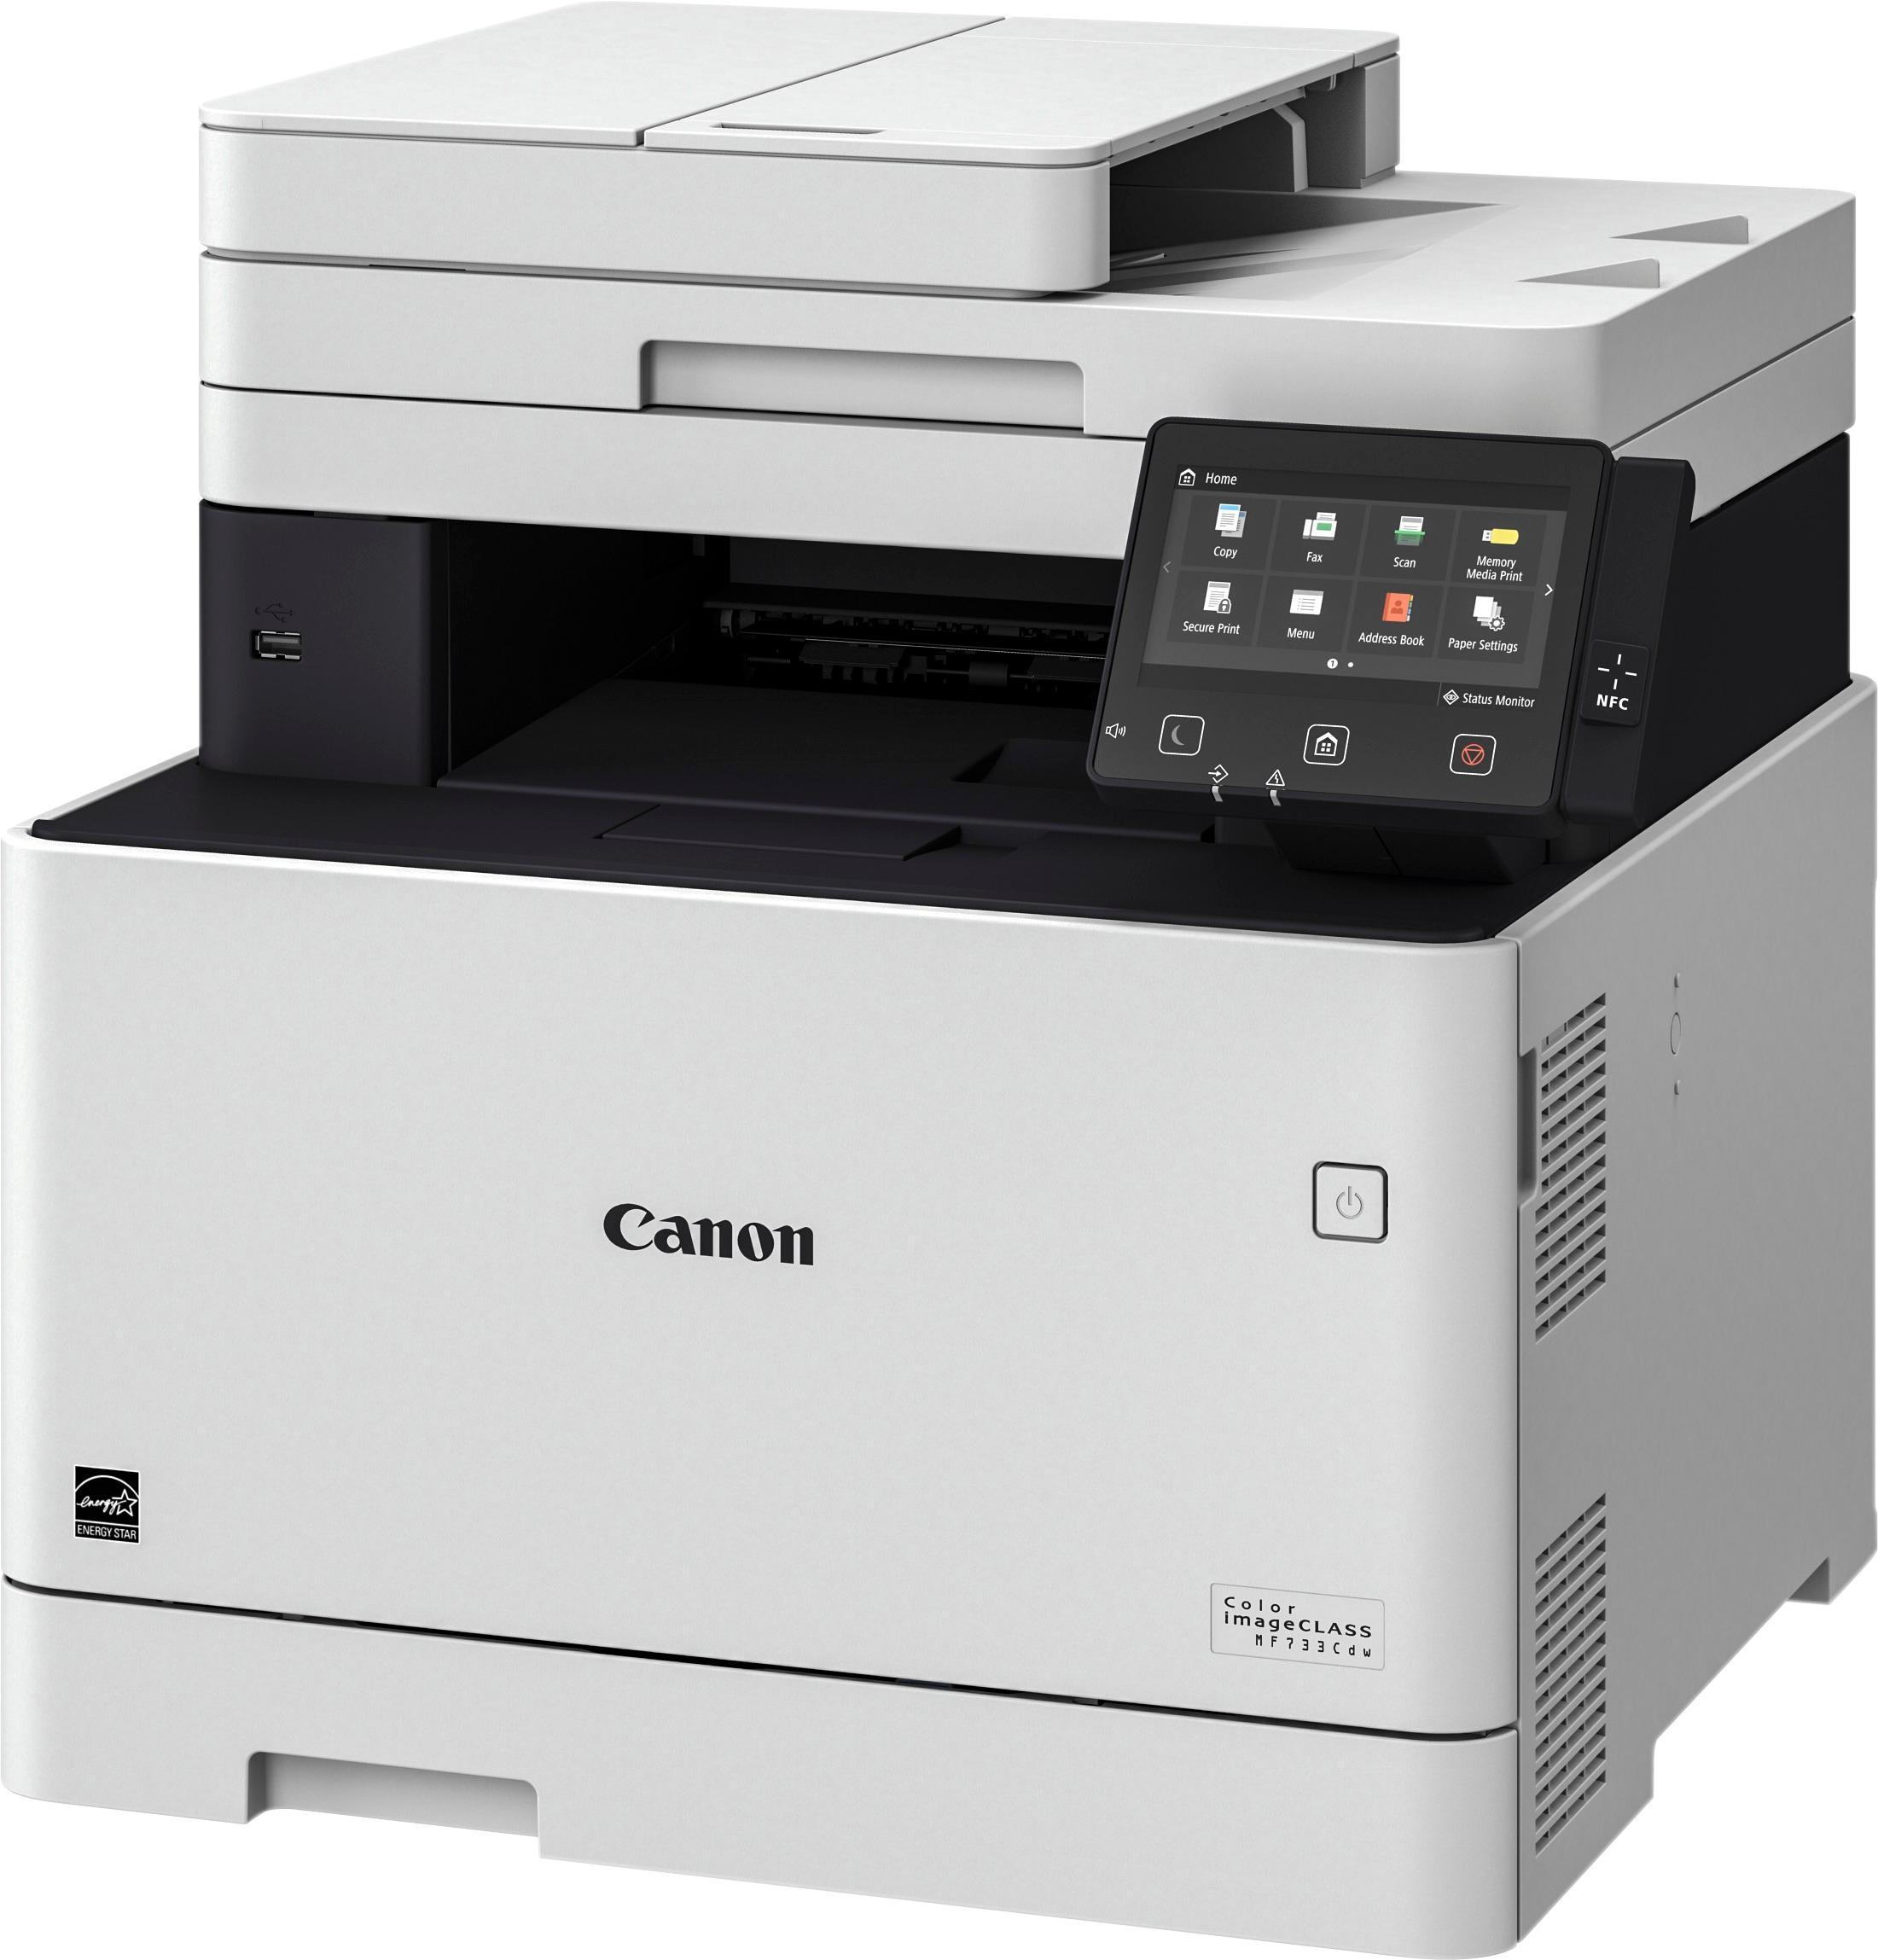 Absolute Toner Canon imageCLASS MF MF733Cdw Laser Multifunction Printer - Color Showroom Color Copiers